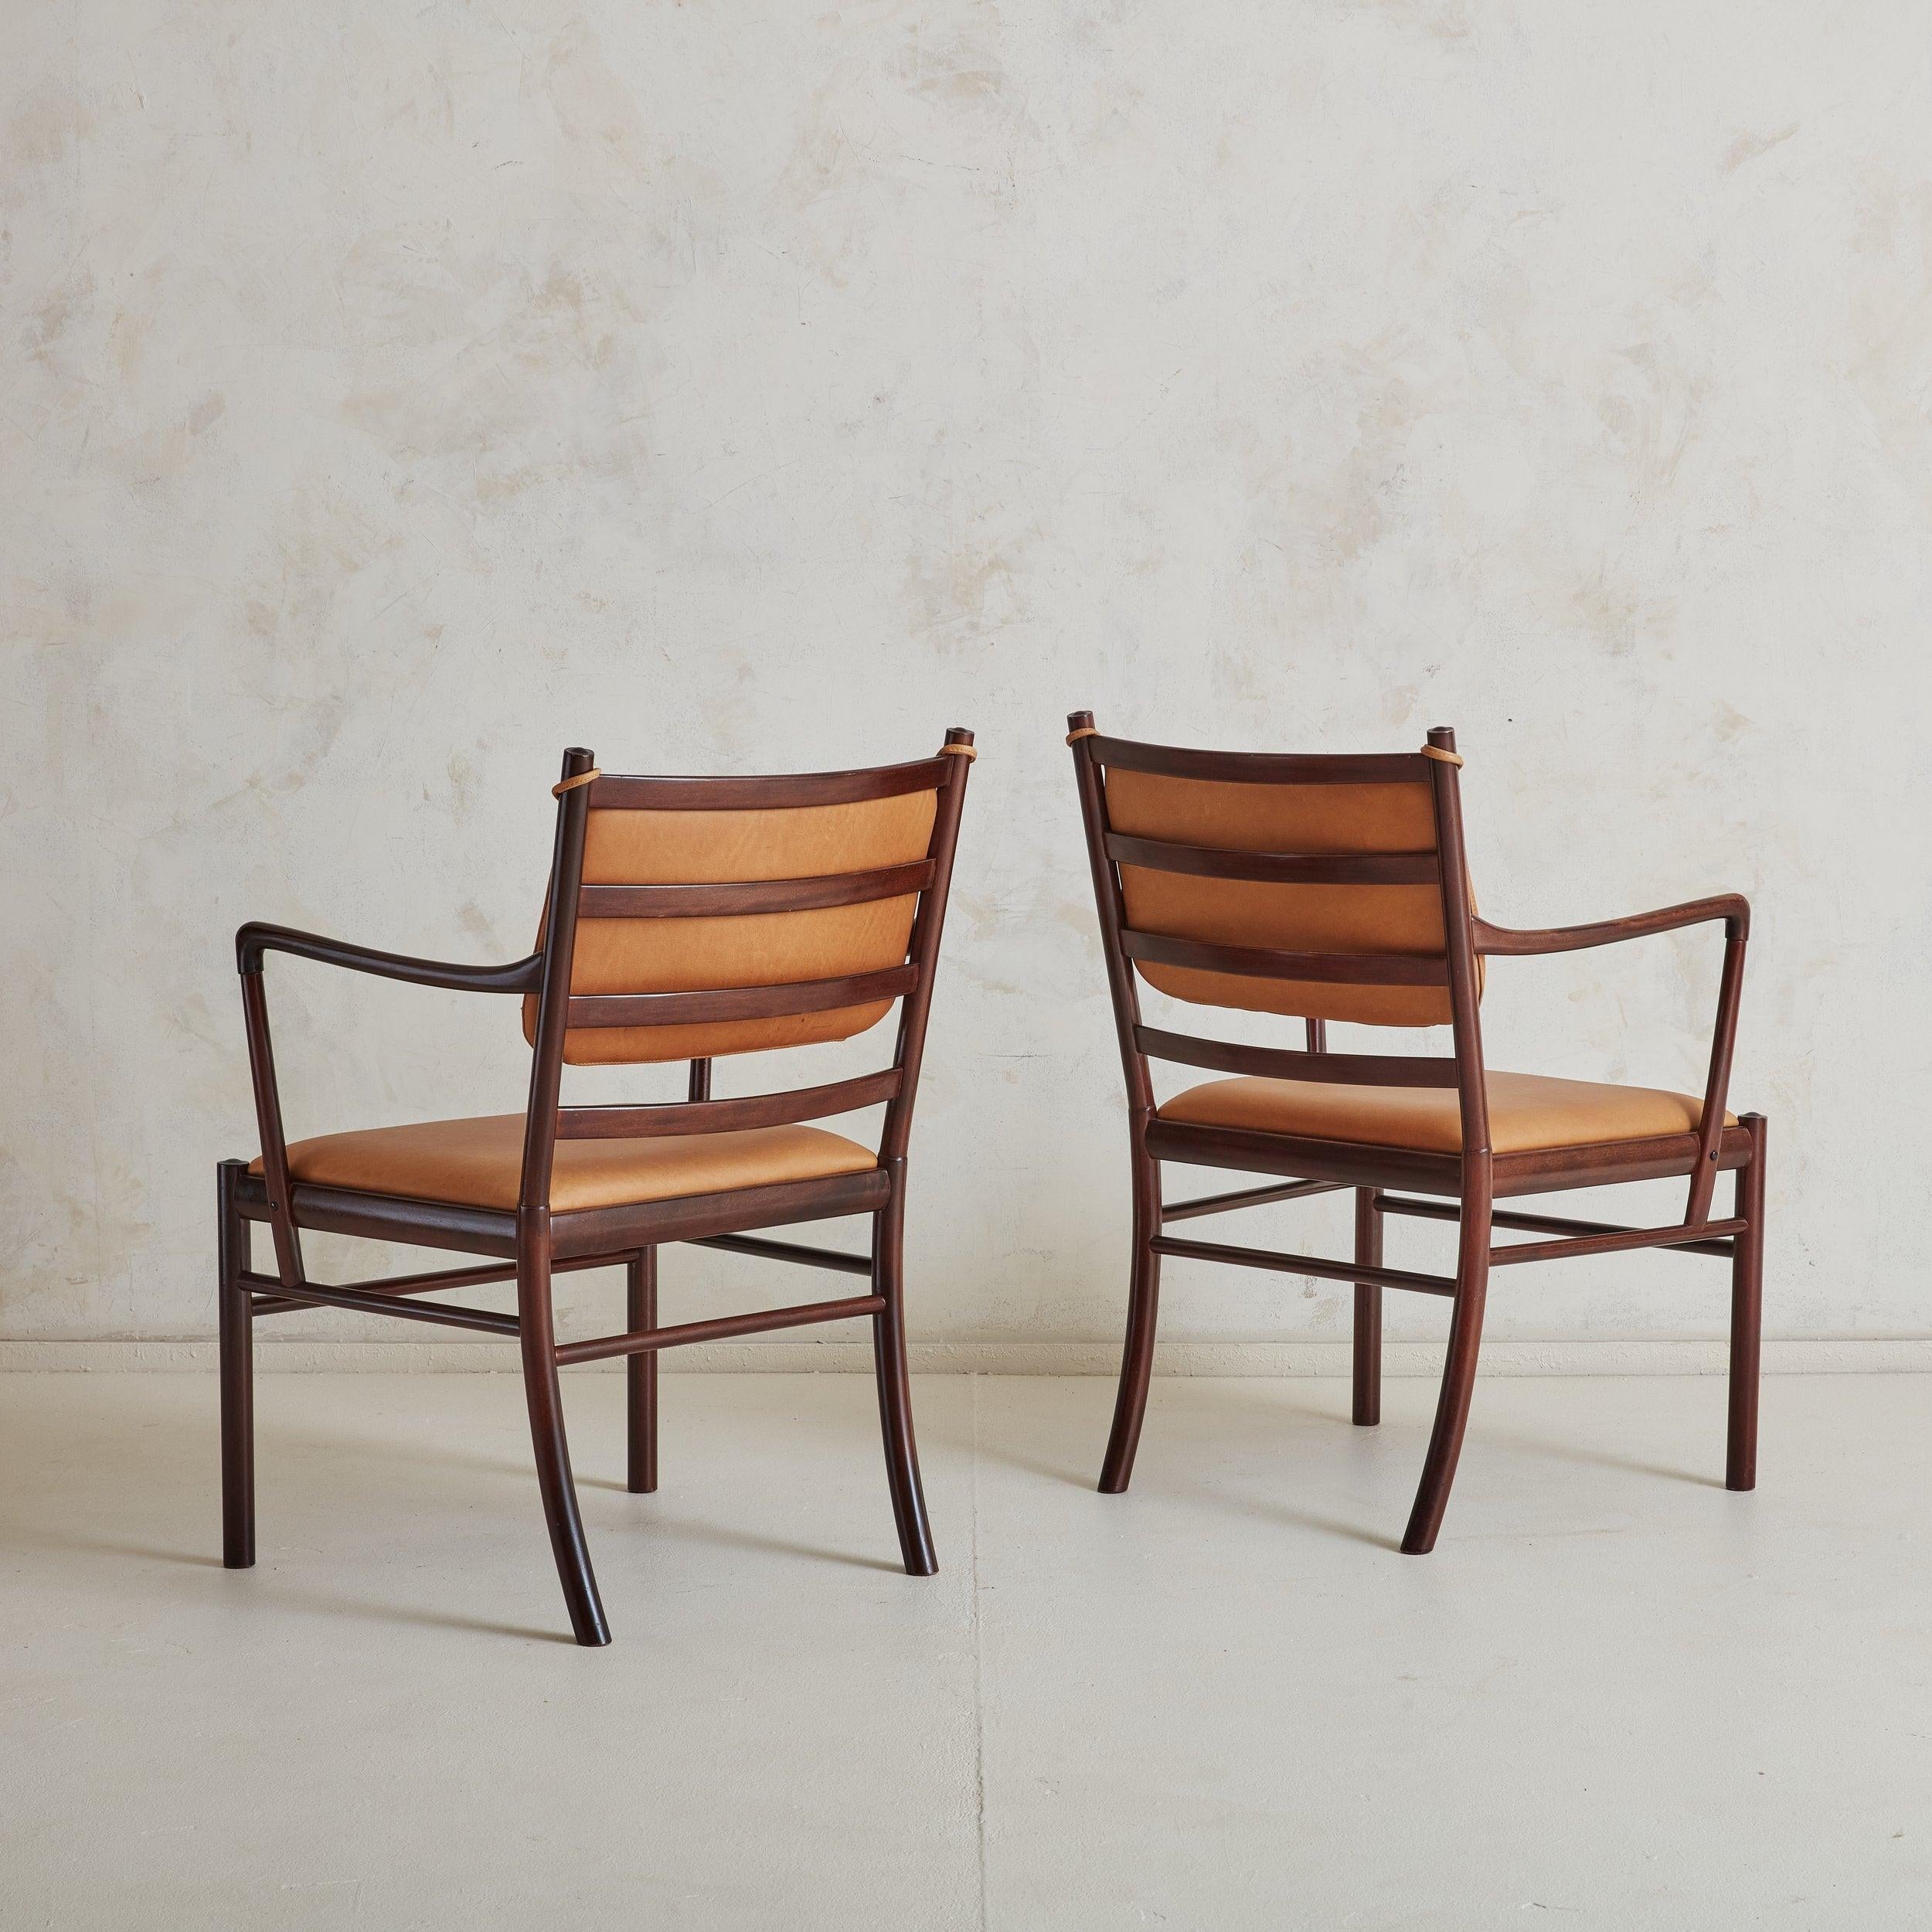 An elegant pair of Danish Modern ‘Colonial’ armchairs designed by Ole Wanscher in the 1960s. These armchairs feature slim mahogany frames in a polished burgundy finish, camel toned leather seats, and matching removable back cushions. A fantastic